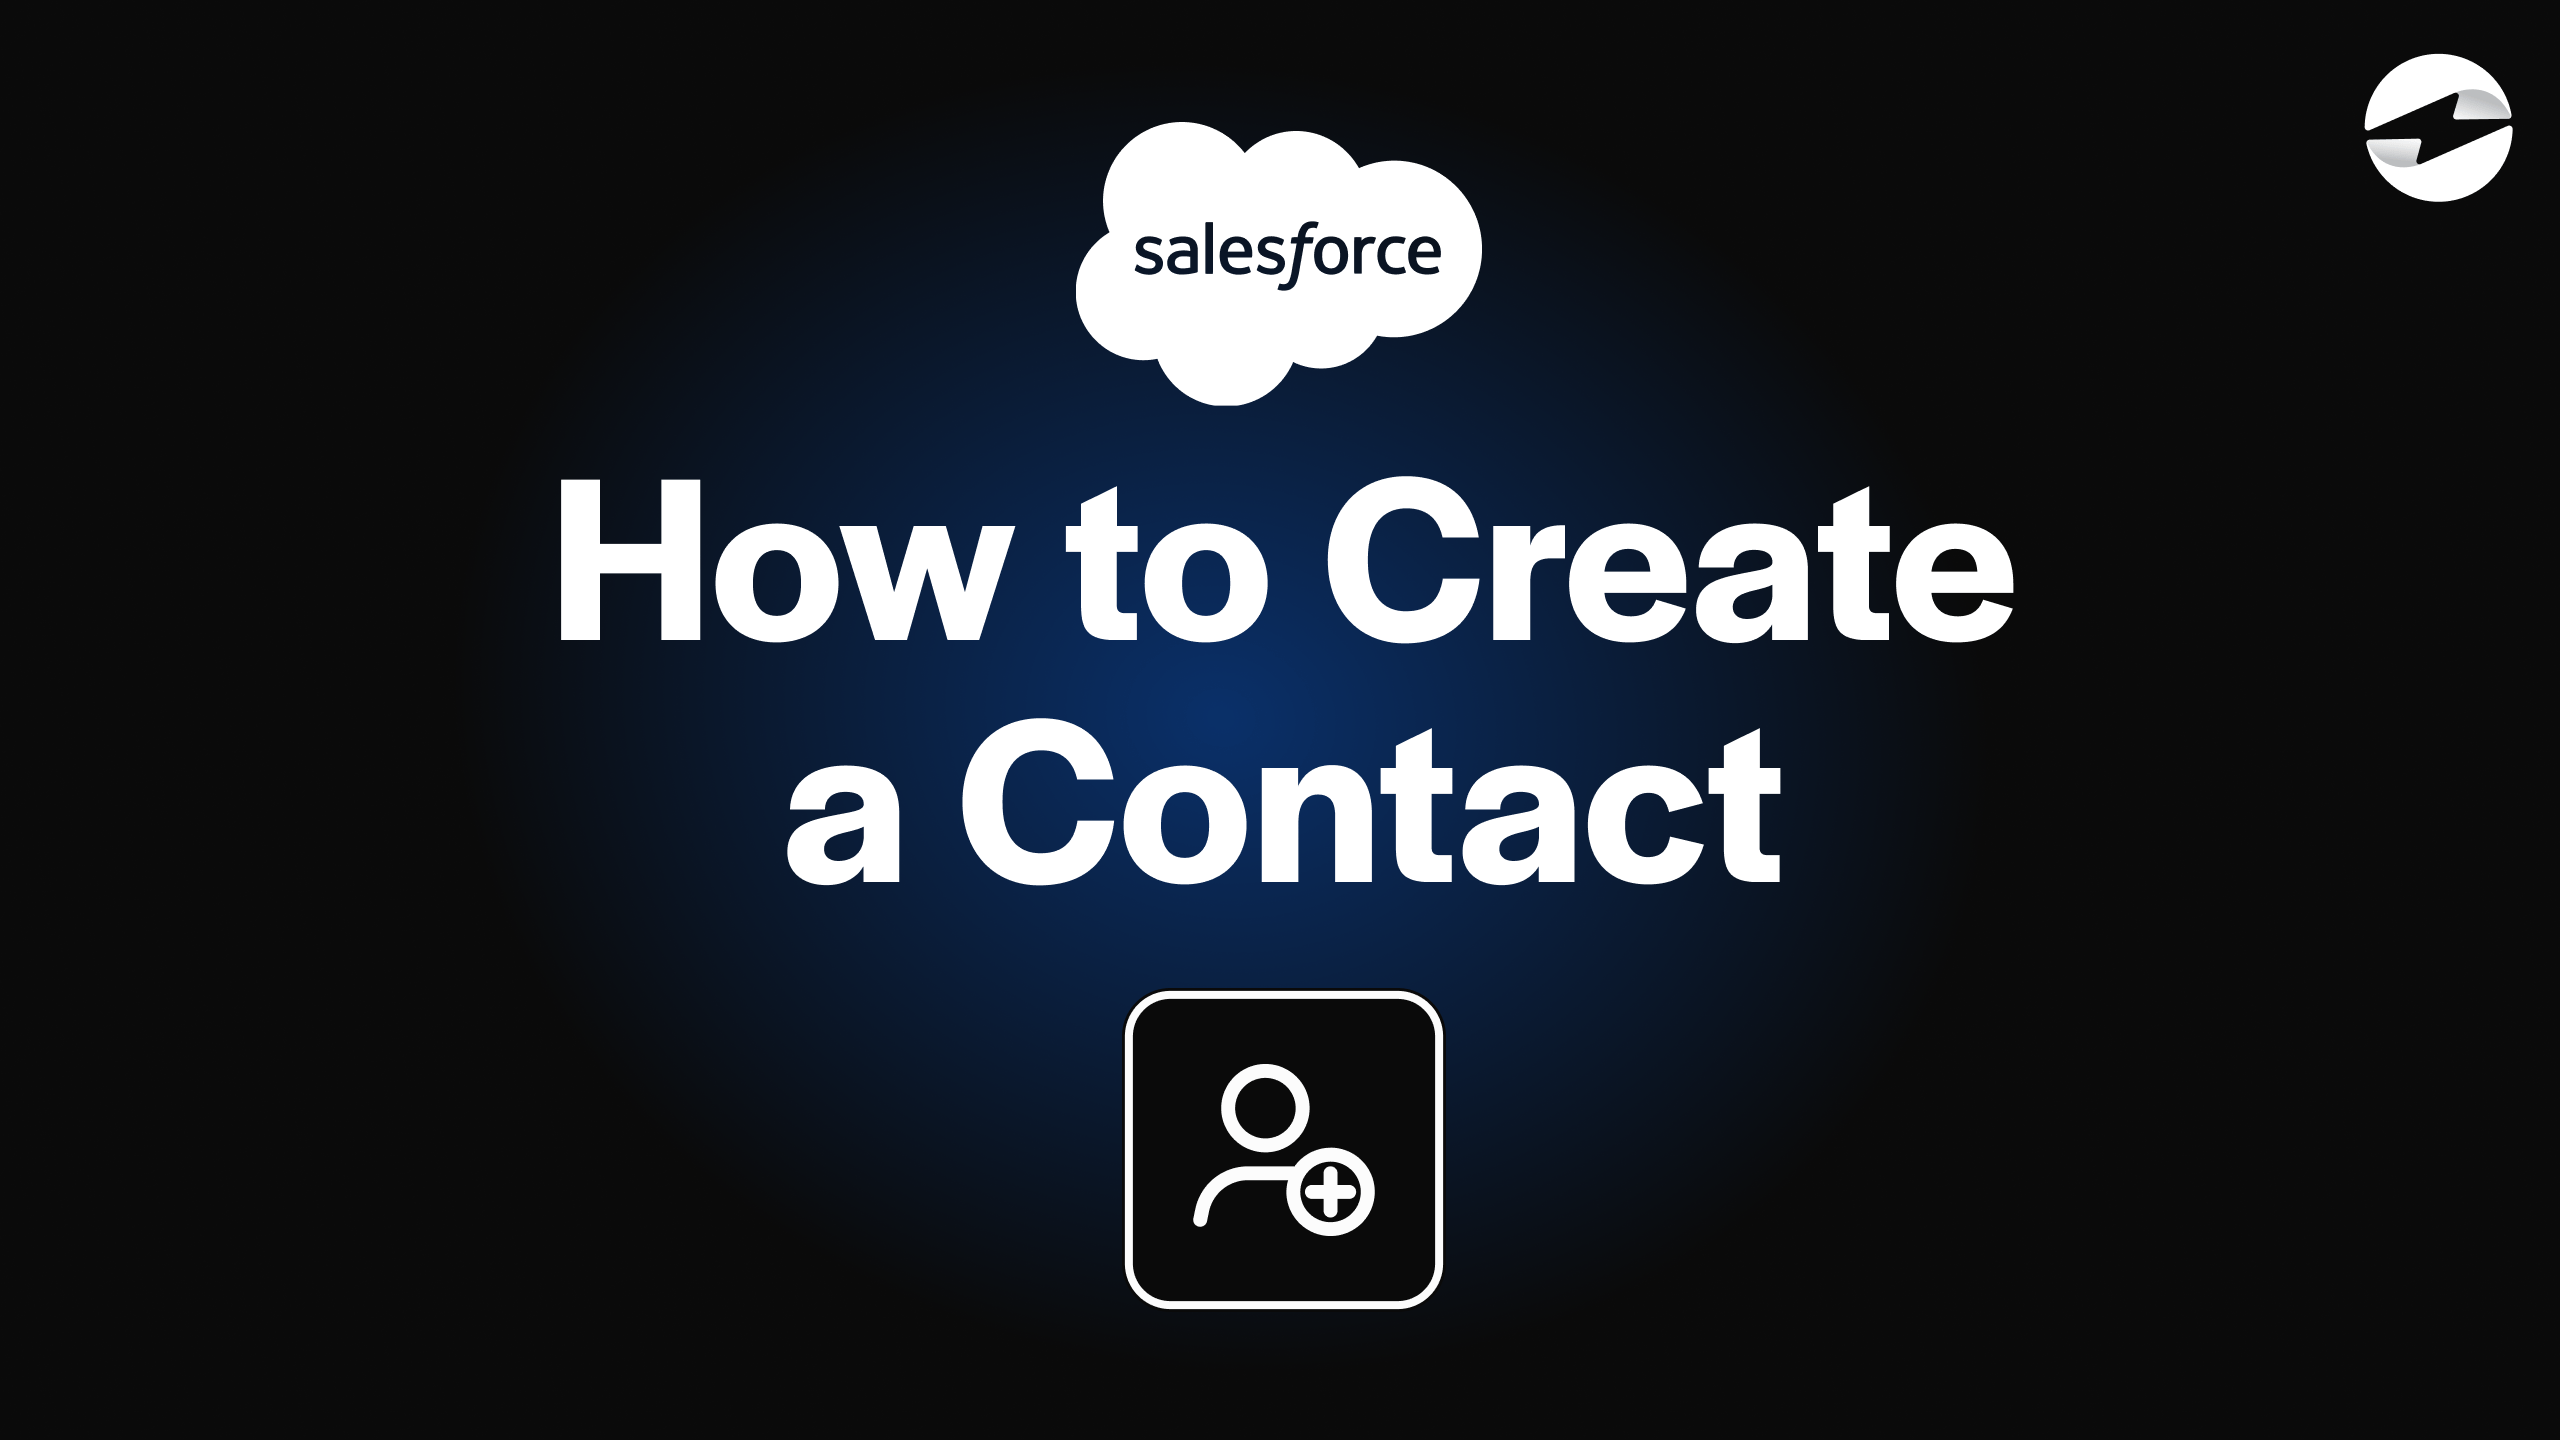 How to Create a Contact - Salesforce